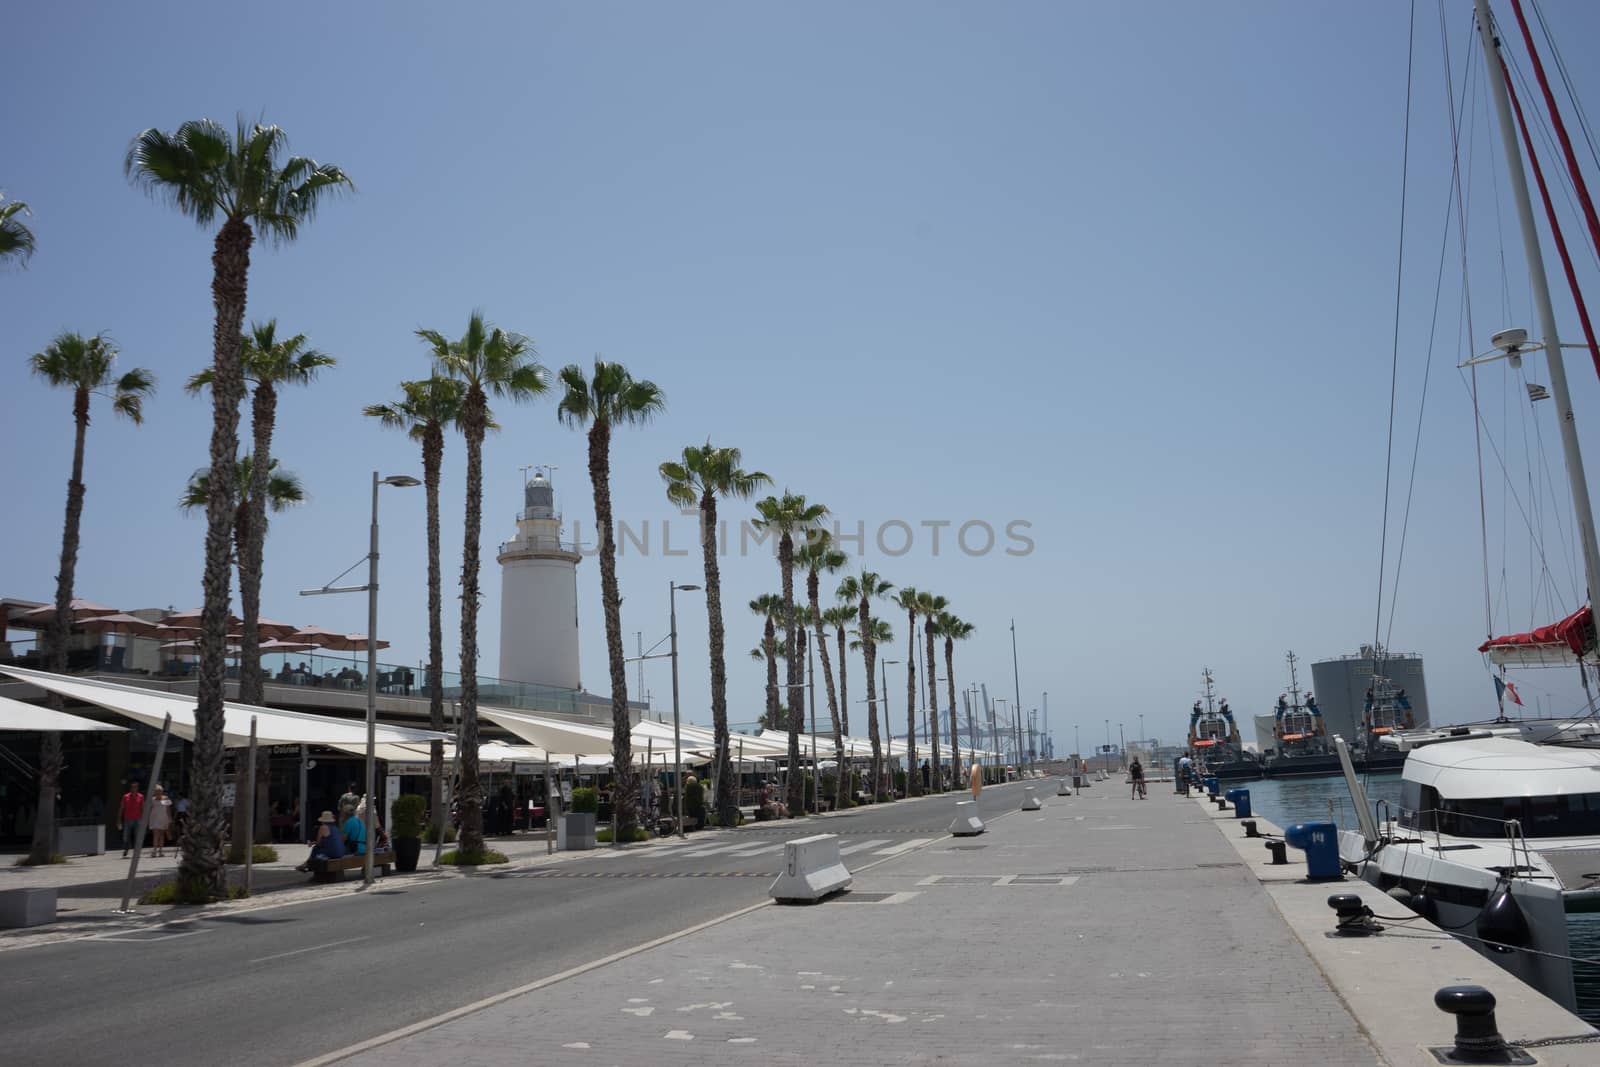 tall palm trees in front a white lighthouse at Malagueta beach in Malaga, Spain, Europe on a bright summer day with clear skies